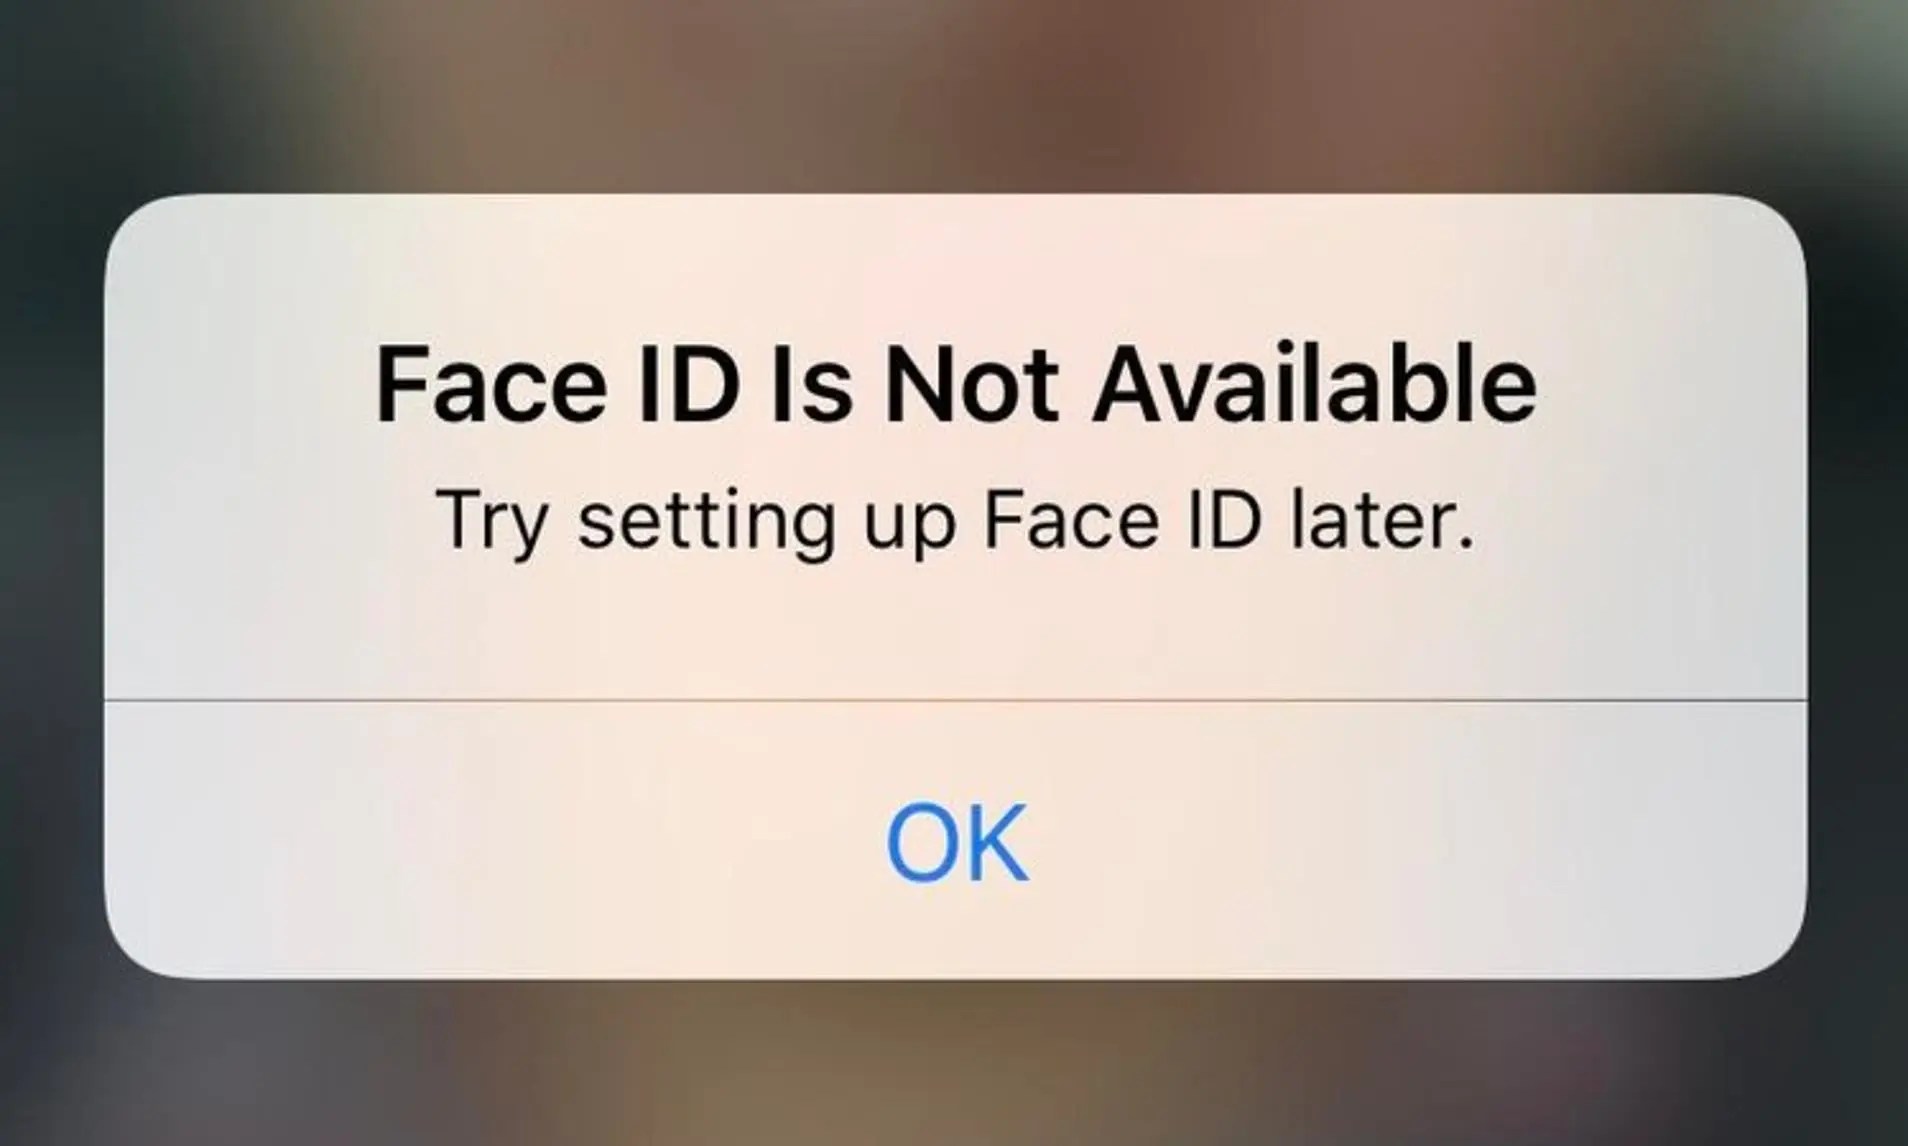 iPhone or iPad “Face ID Is Not Available”? Here’s The Real Fix